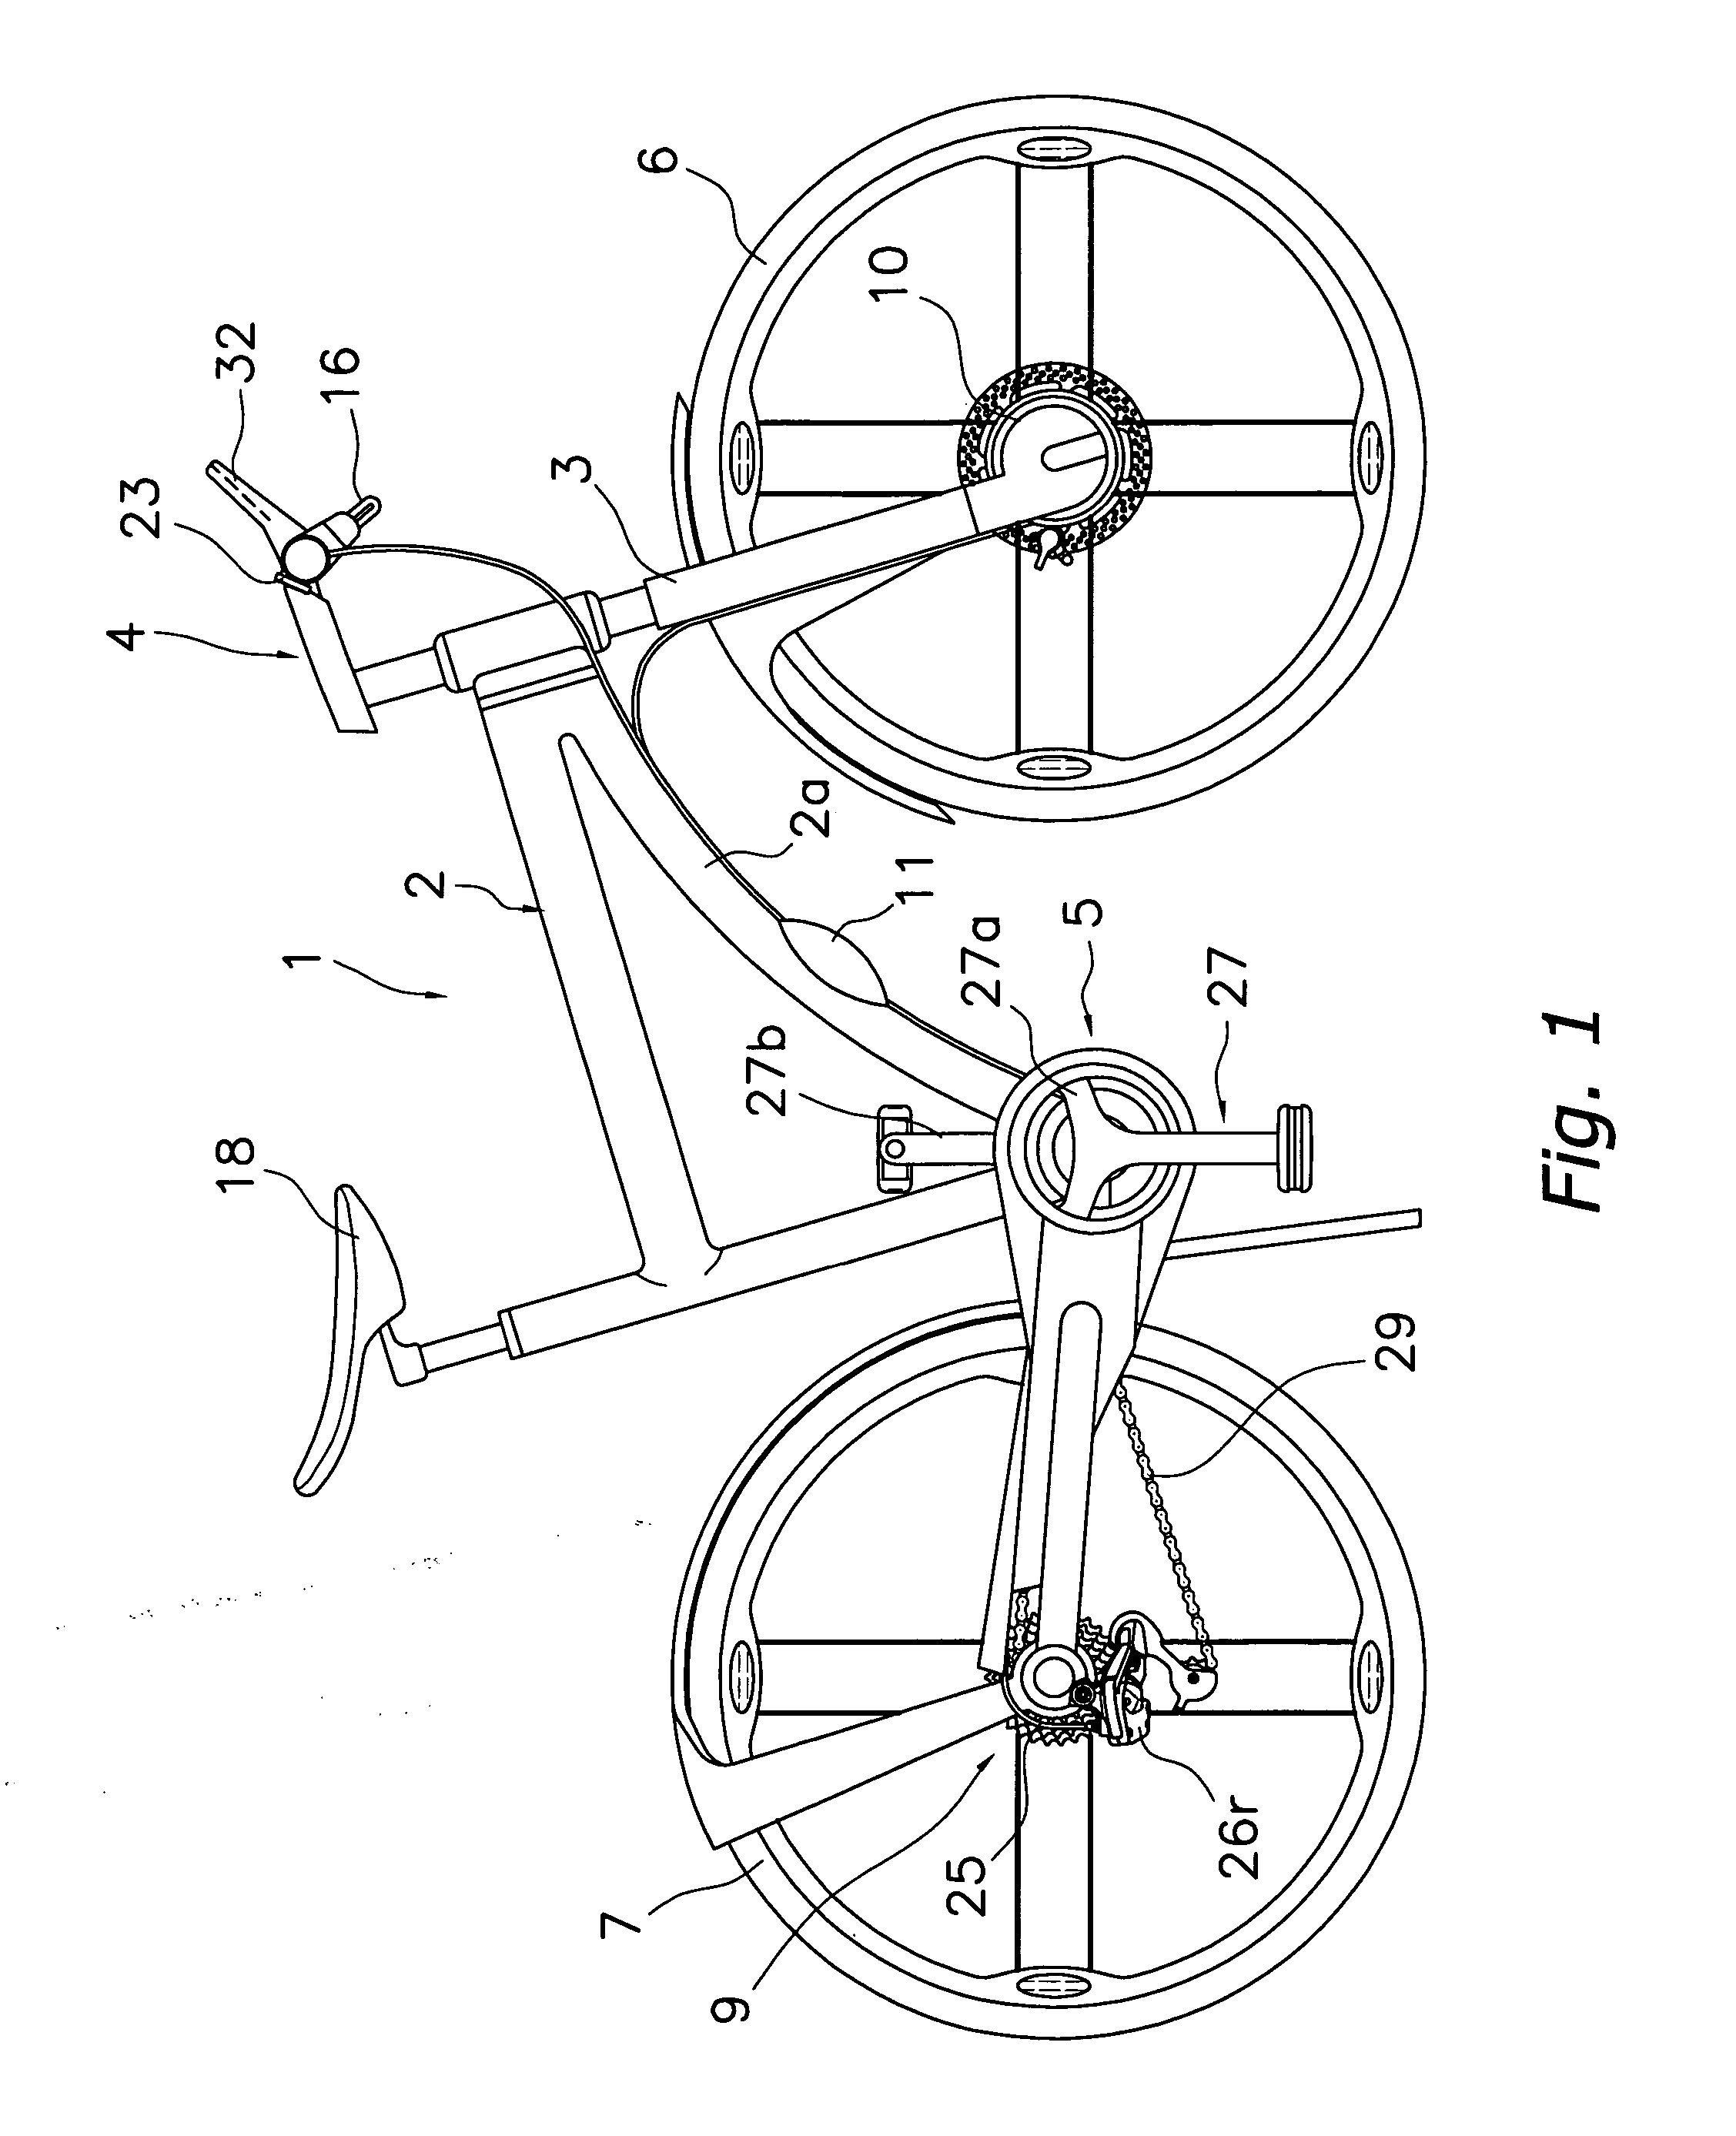 Bicycle electric power unit